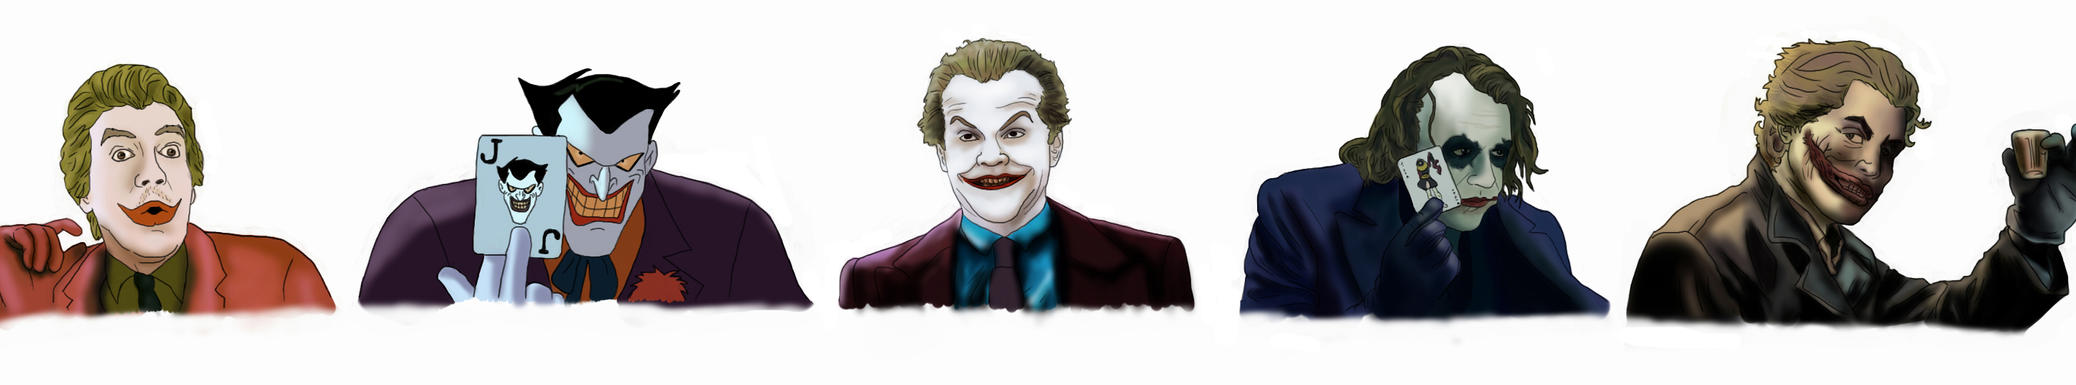 How did the Joker get his scars?